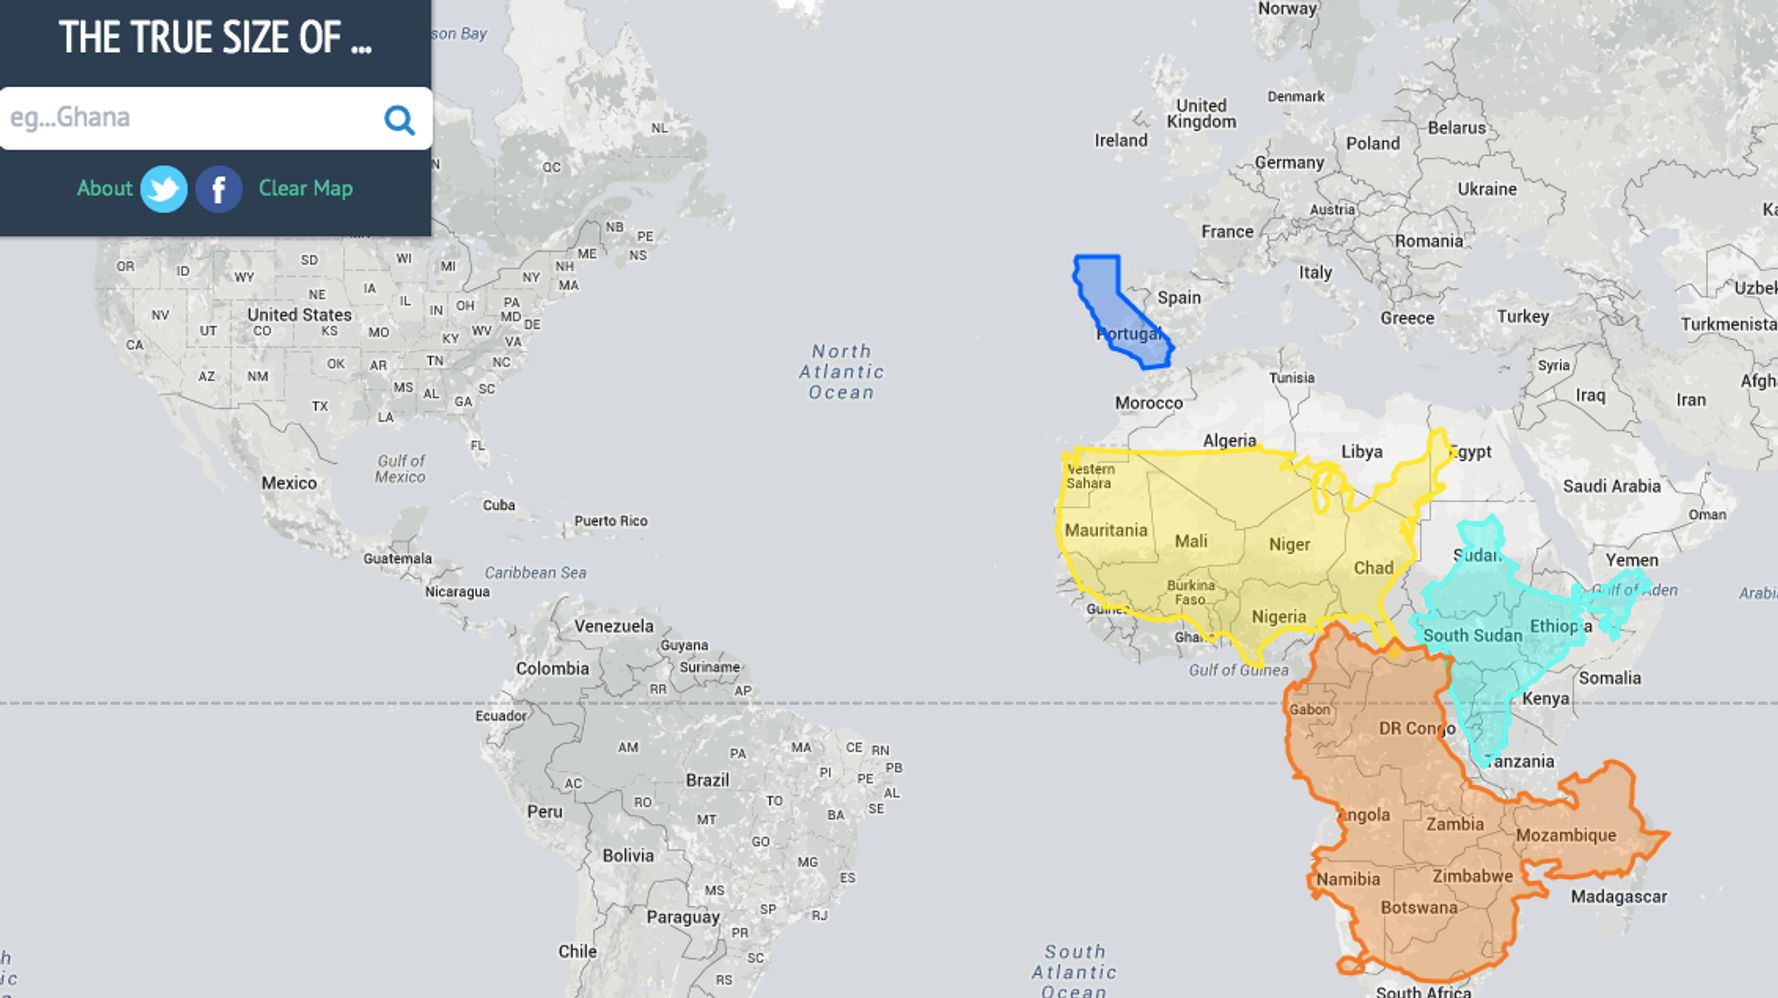 Here's a map showing the true size of countries. Have a good day.